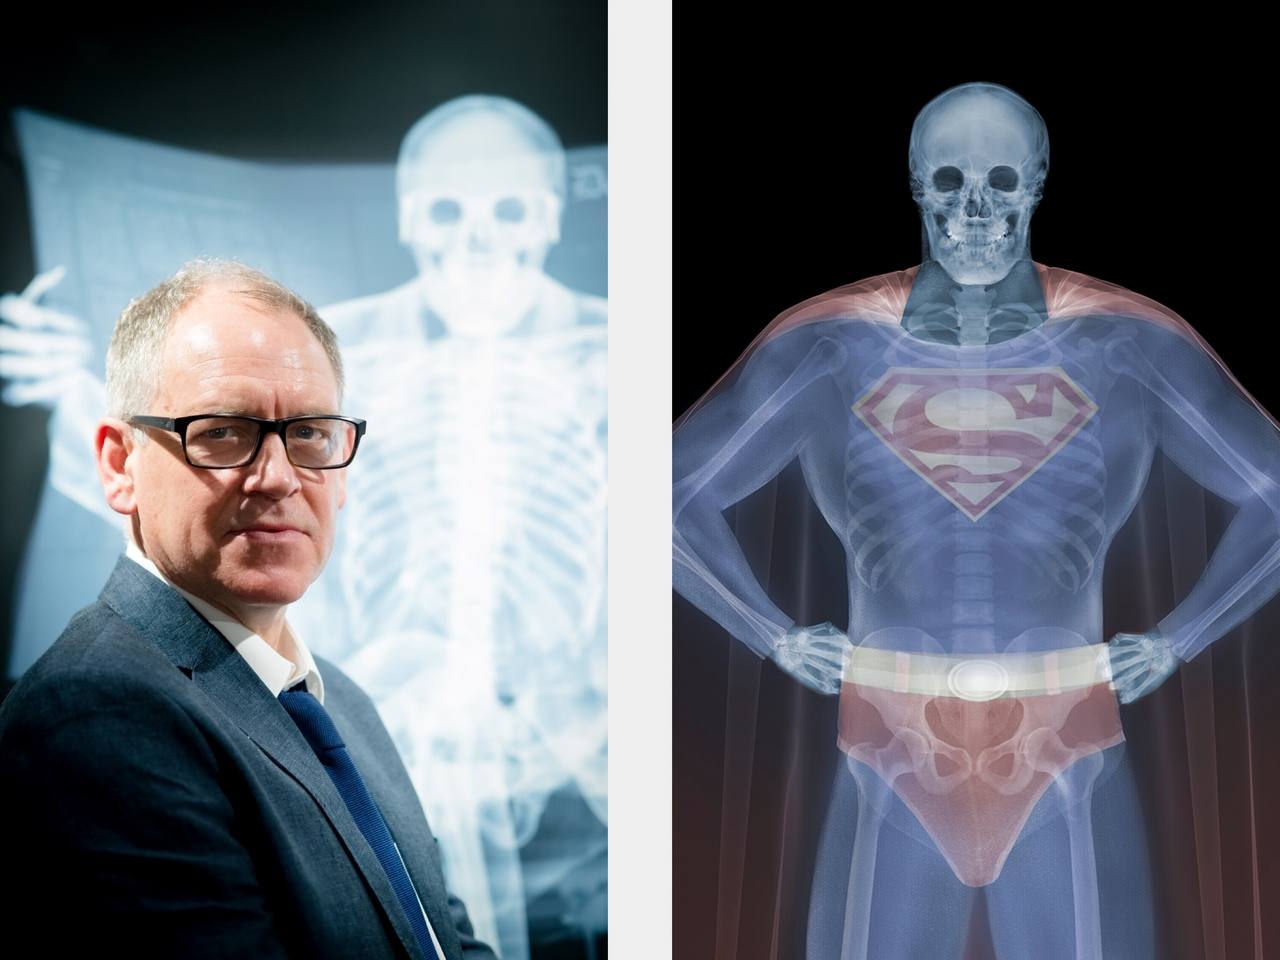 Nick Veasey, Artist and Superman in Colour